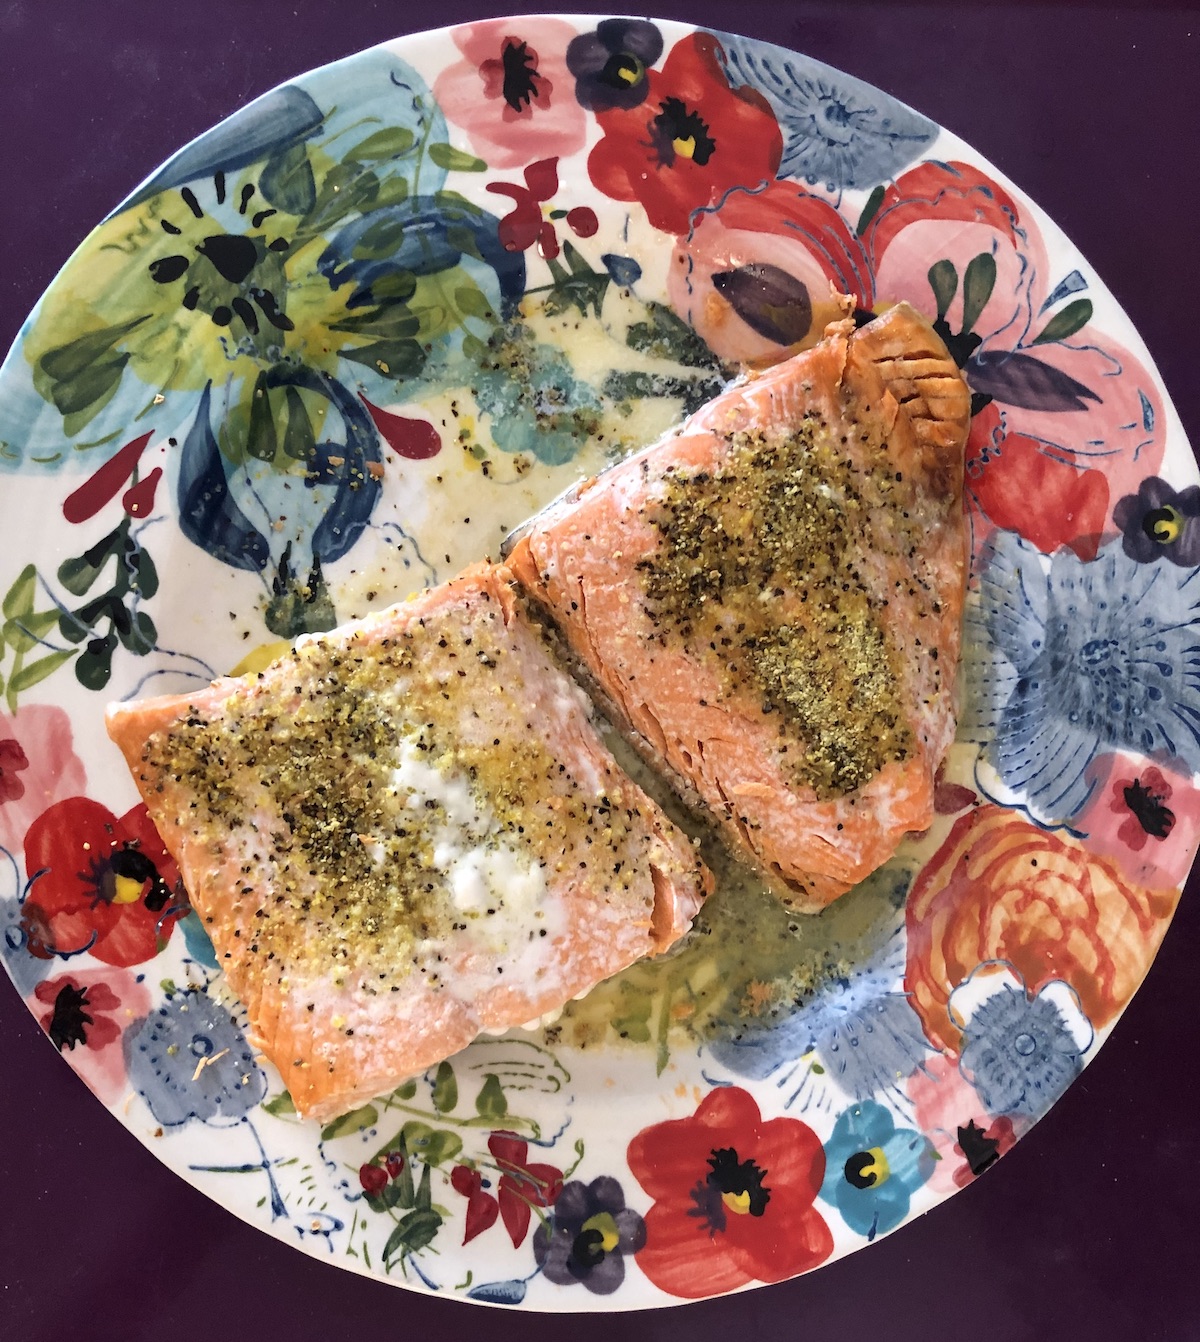 Microwave poached salmon filets on plate